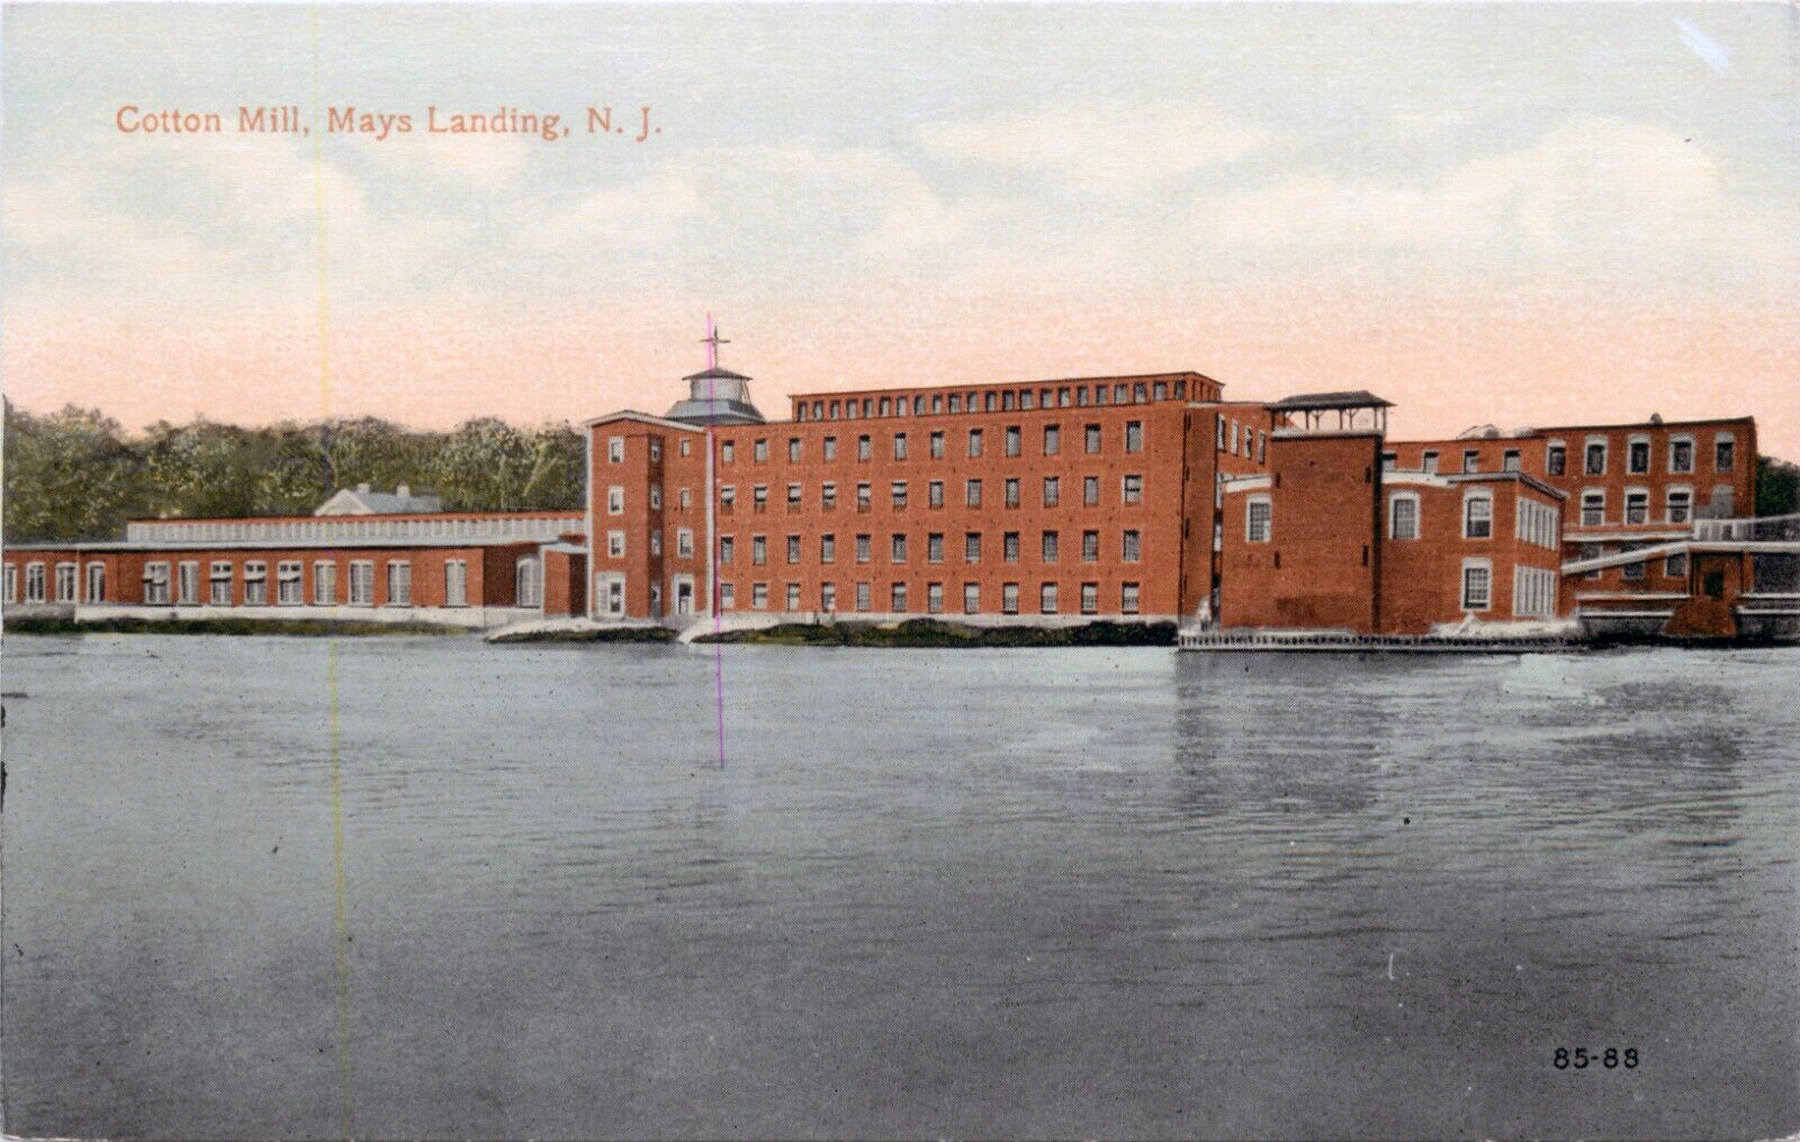 Mays Landing - View across the water of the Cotton Mill - c 1910